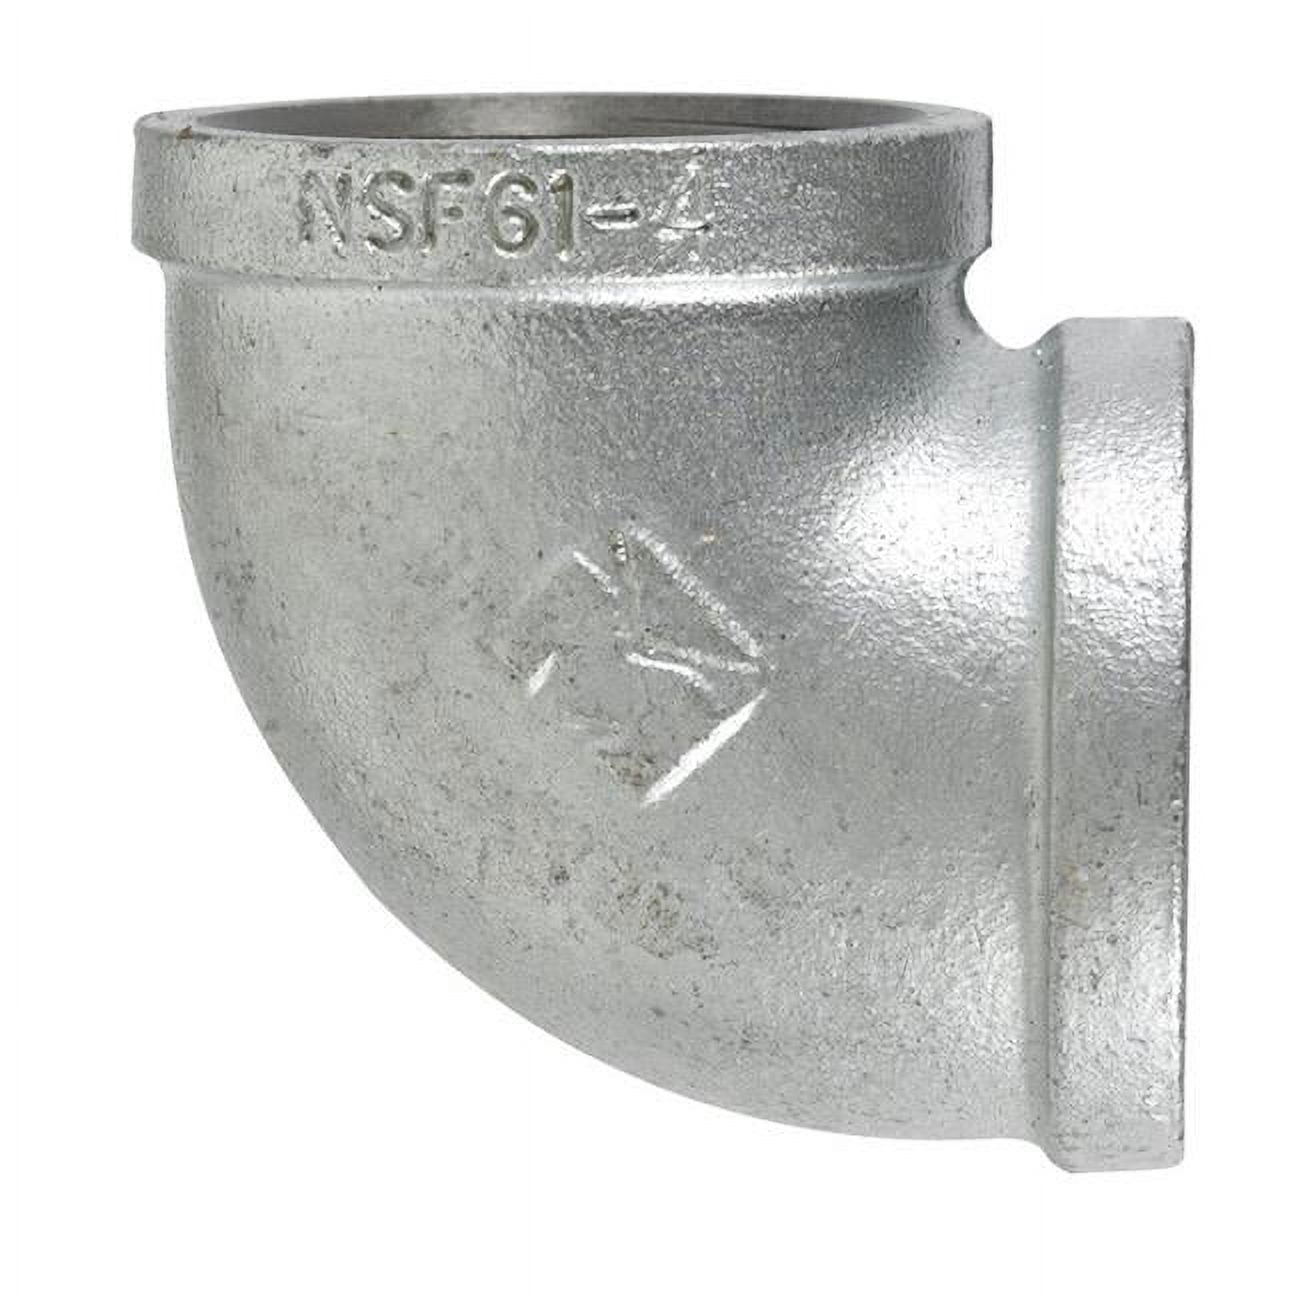 4290409 2.5 In. Fpt X 2.5 In. Dia. Fpt Galvanized Malleable Iron Elbow